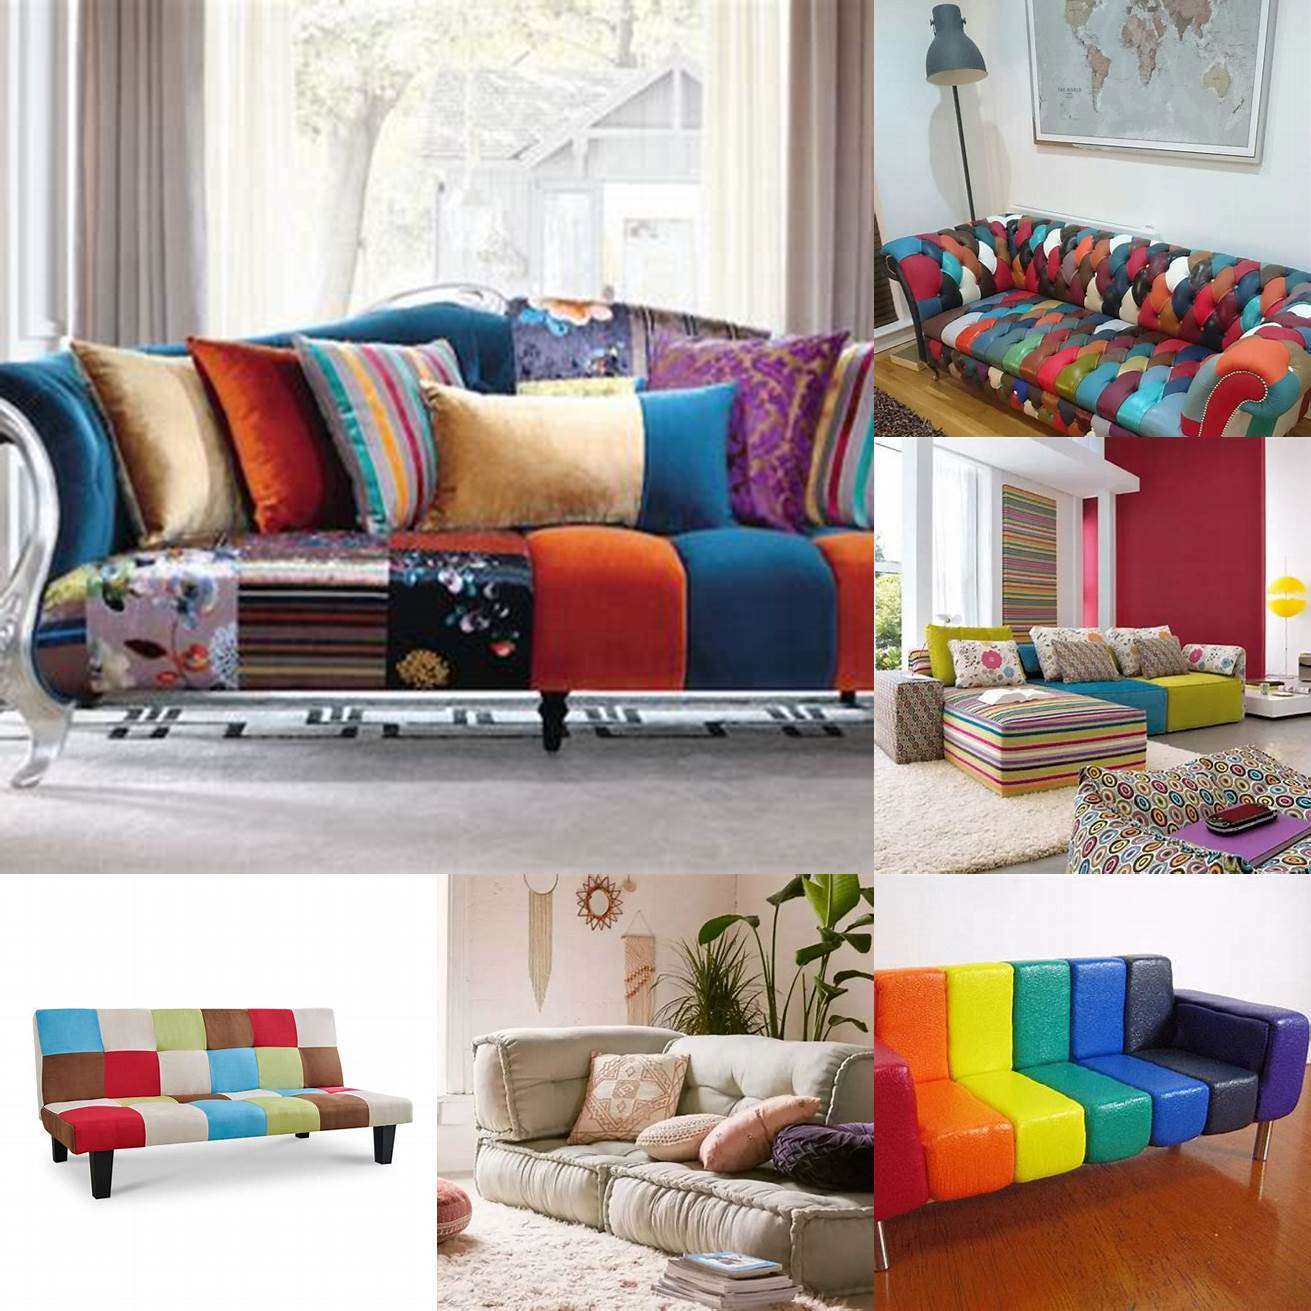 The Rainbow Sofa is the perfect statement piece for any living room